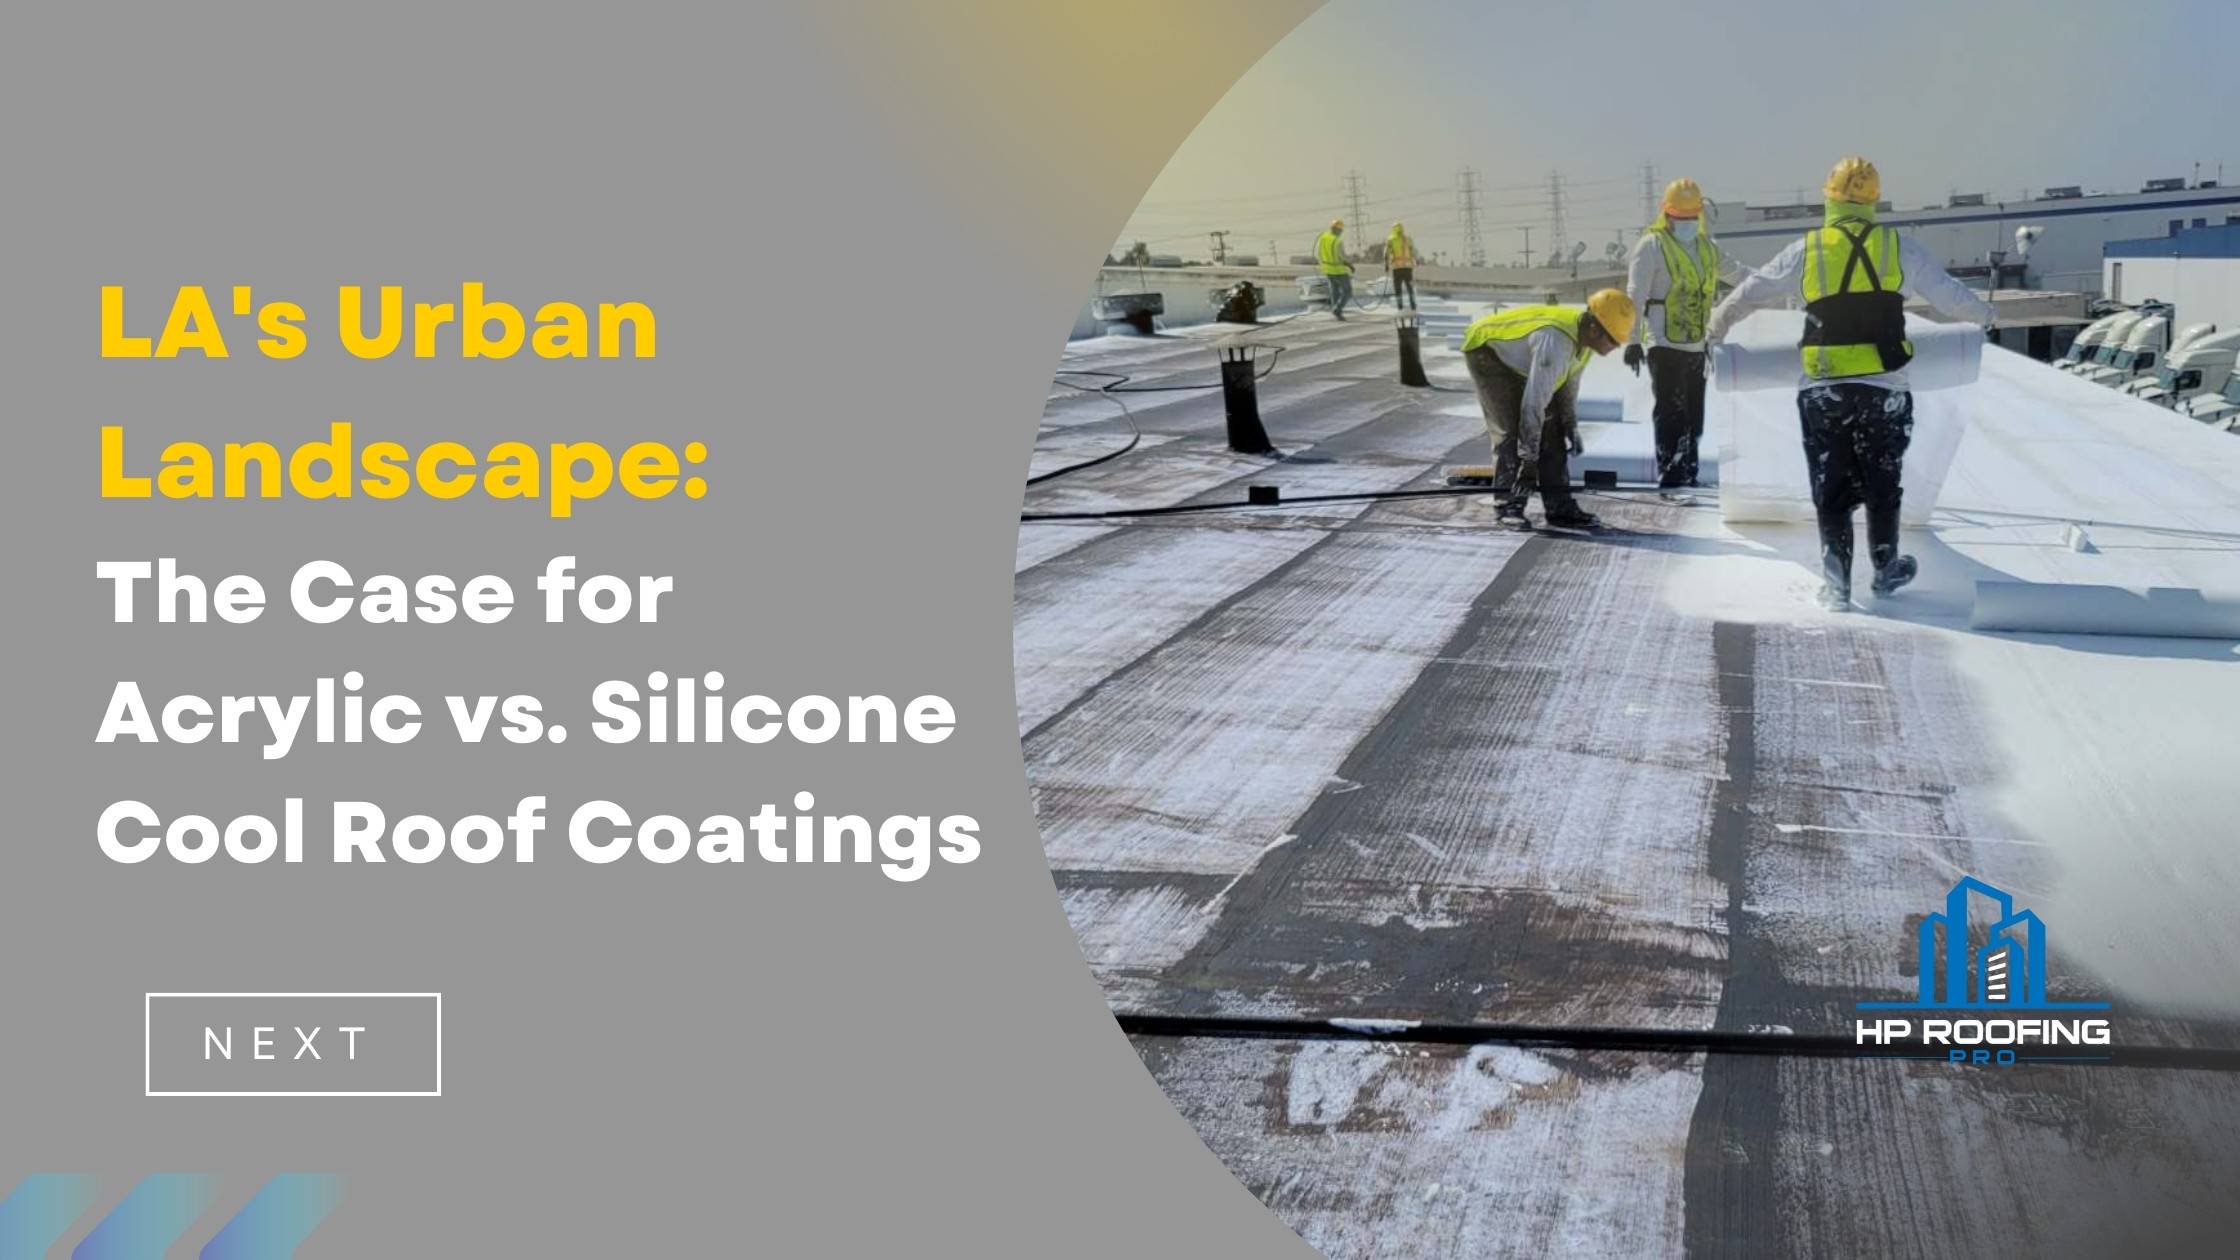 LA's Urban Landscape: The Case for Acrylic vs. Silicone Cool Roof Coatings